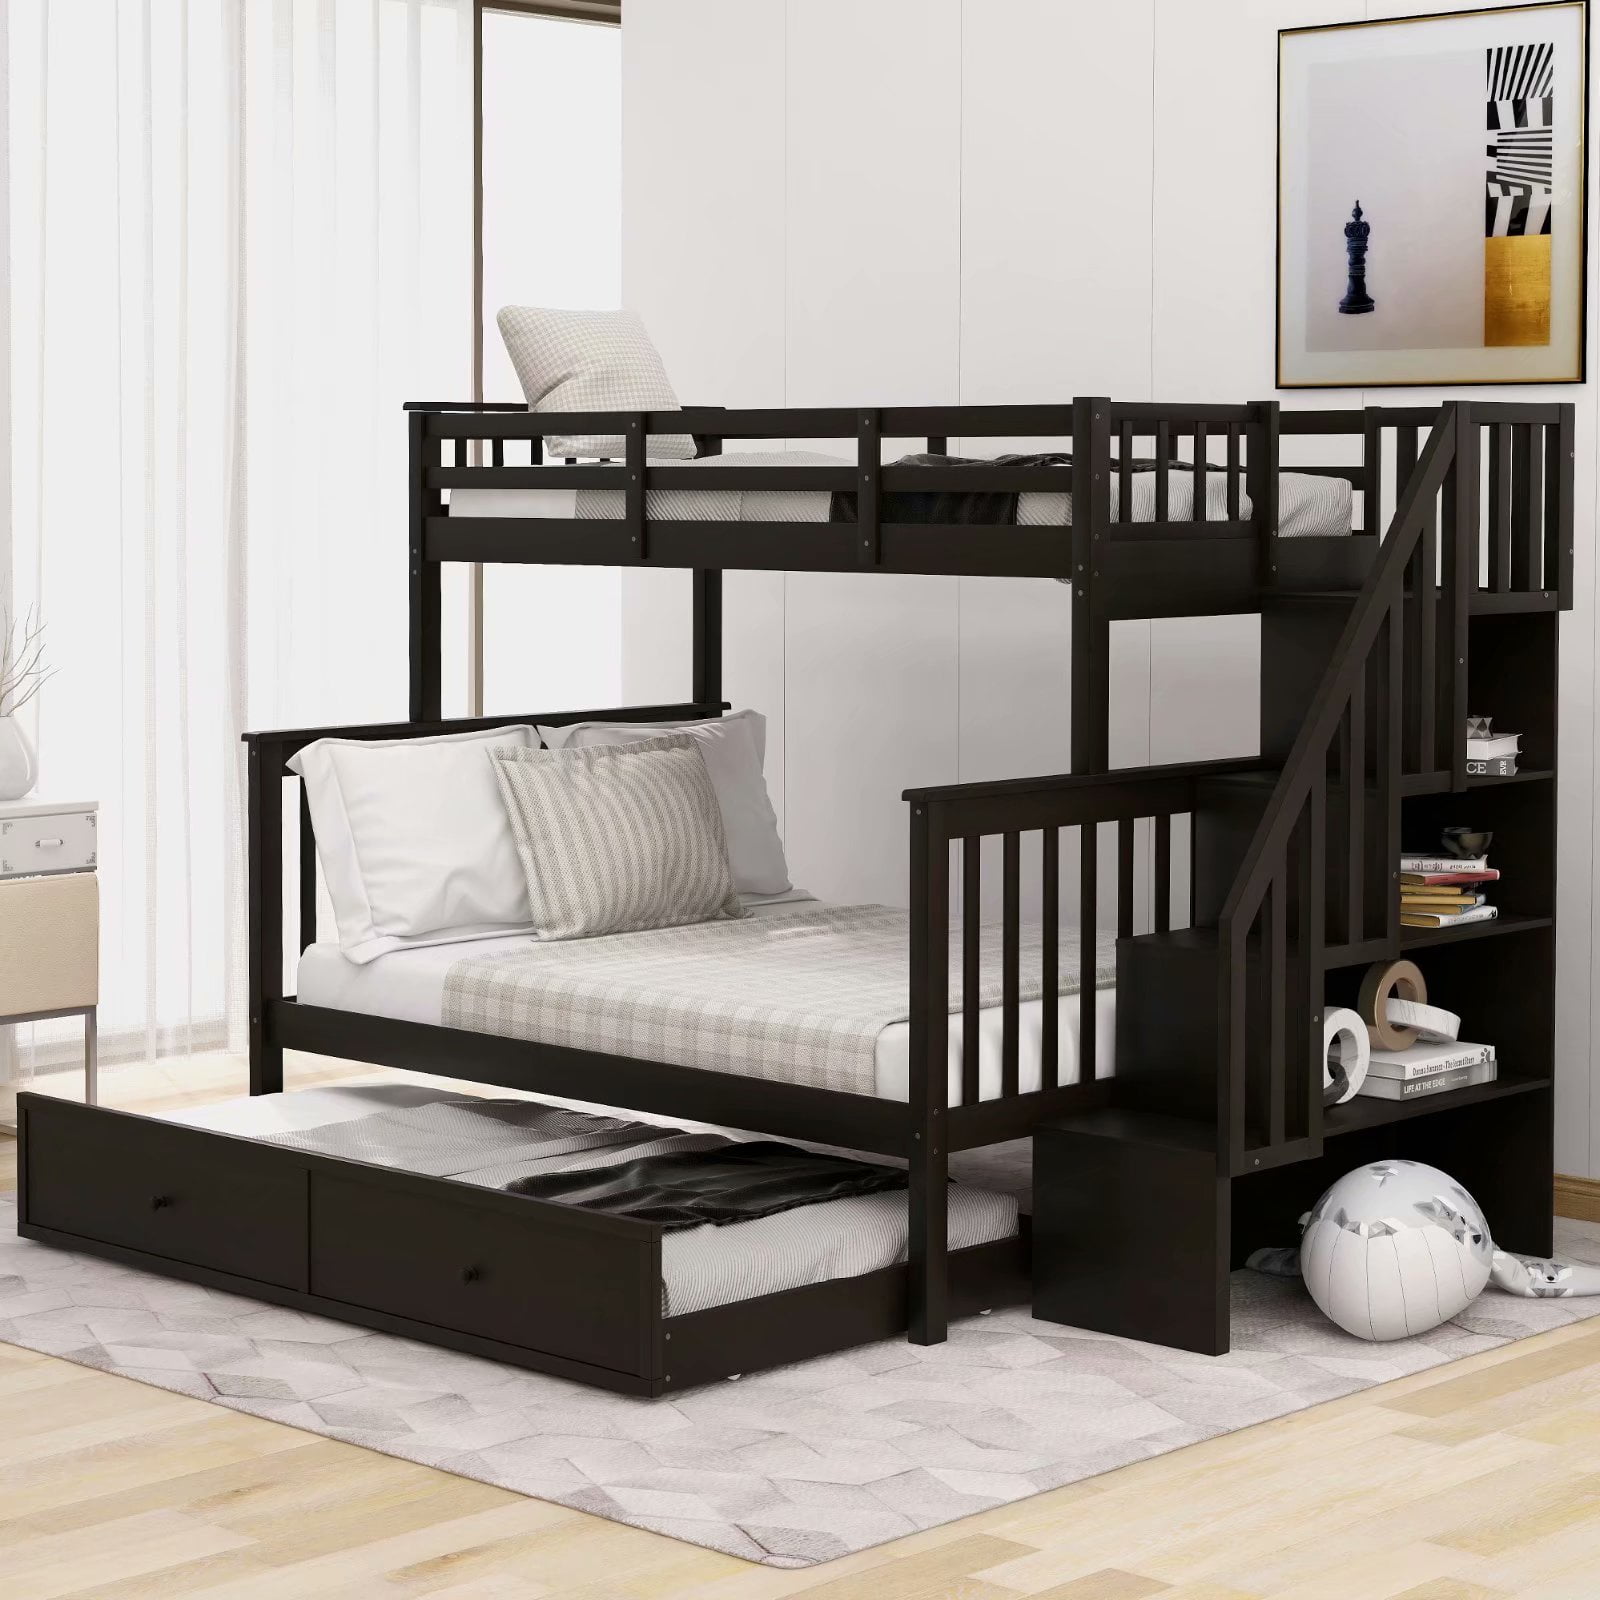 Trundle Solid Wood Bunk Bed Frame, Full Size Bunk Bed Box Spring